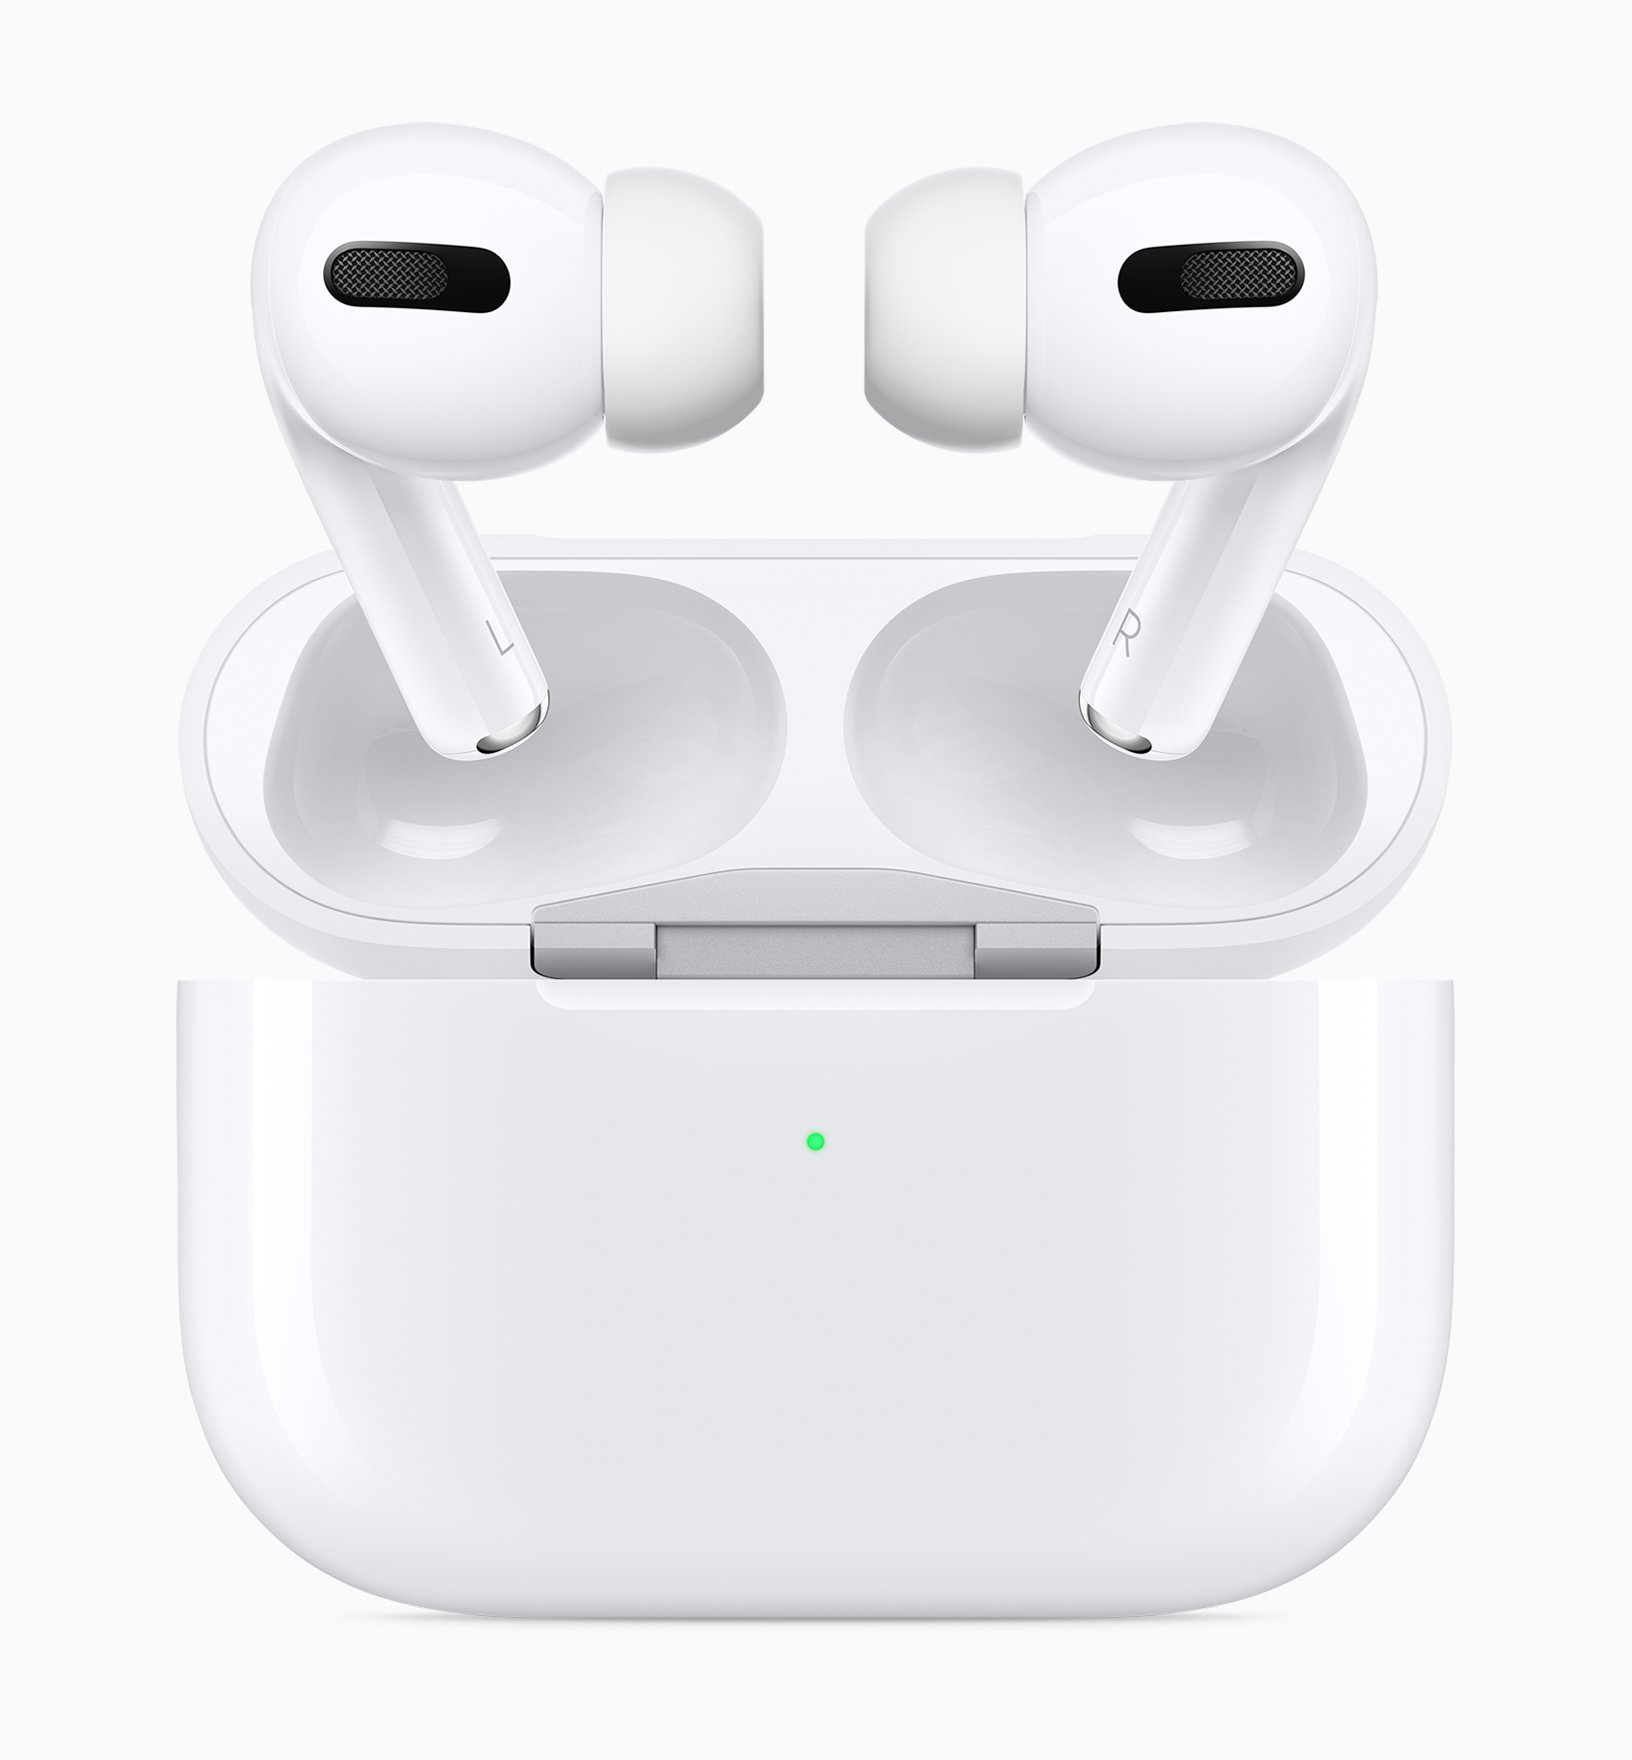 Thiết kế tai nghe AirPods Pro